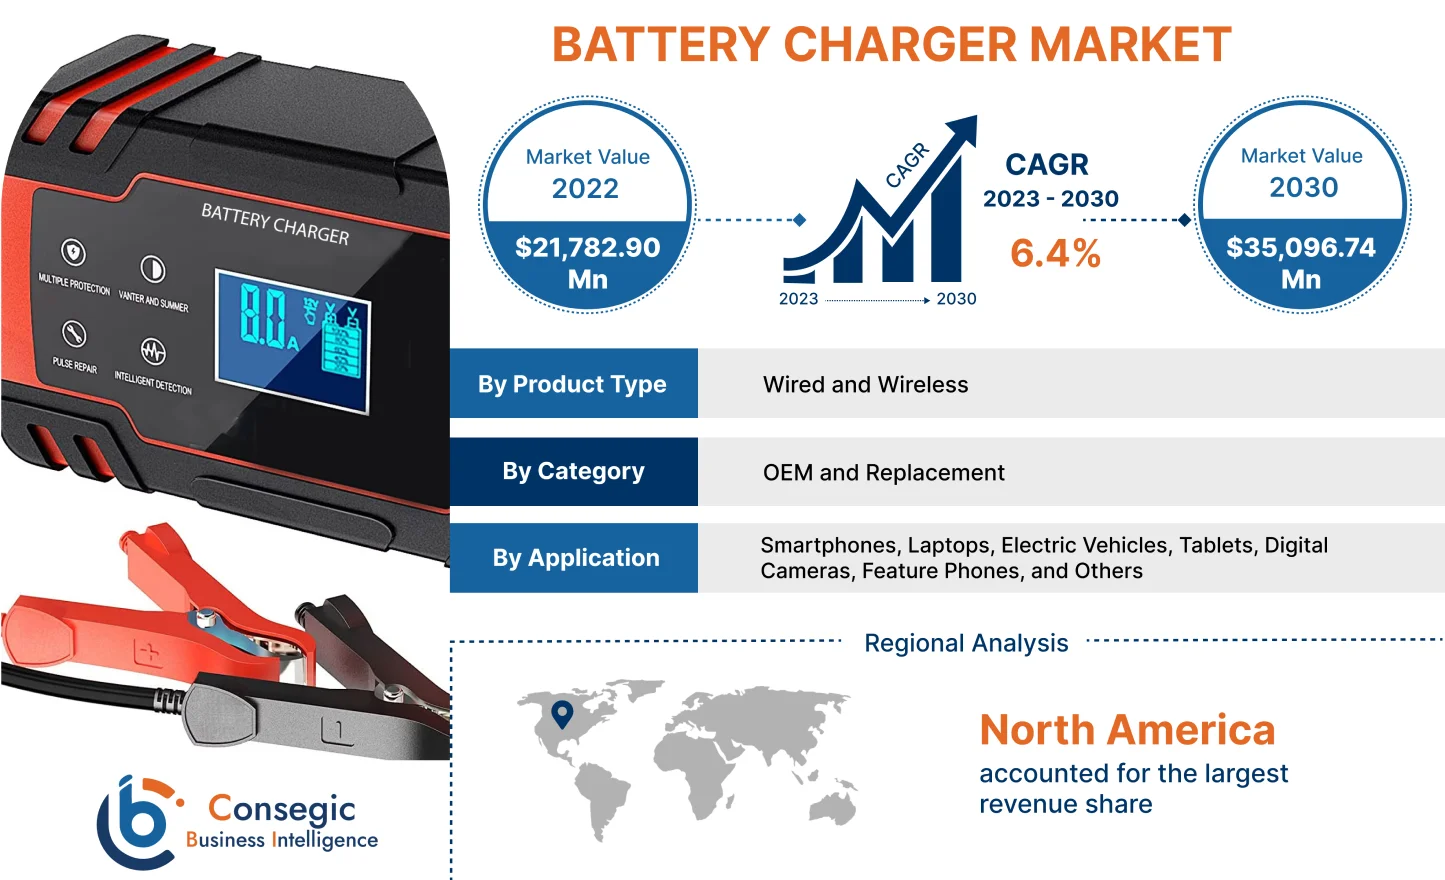 Battery Charger Market 